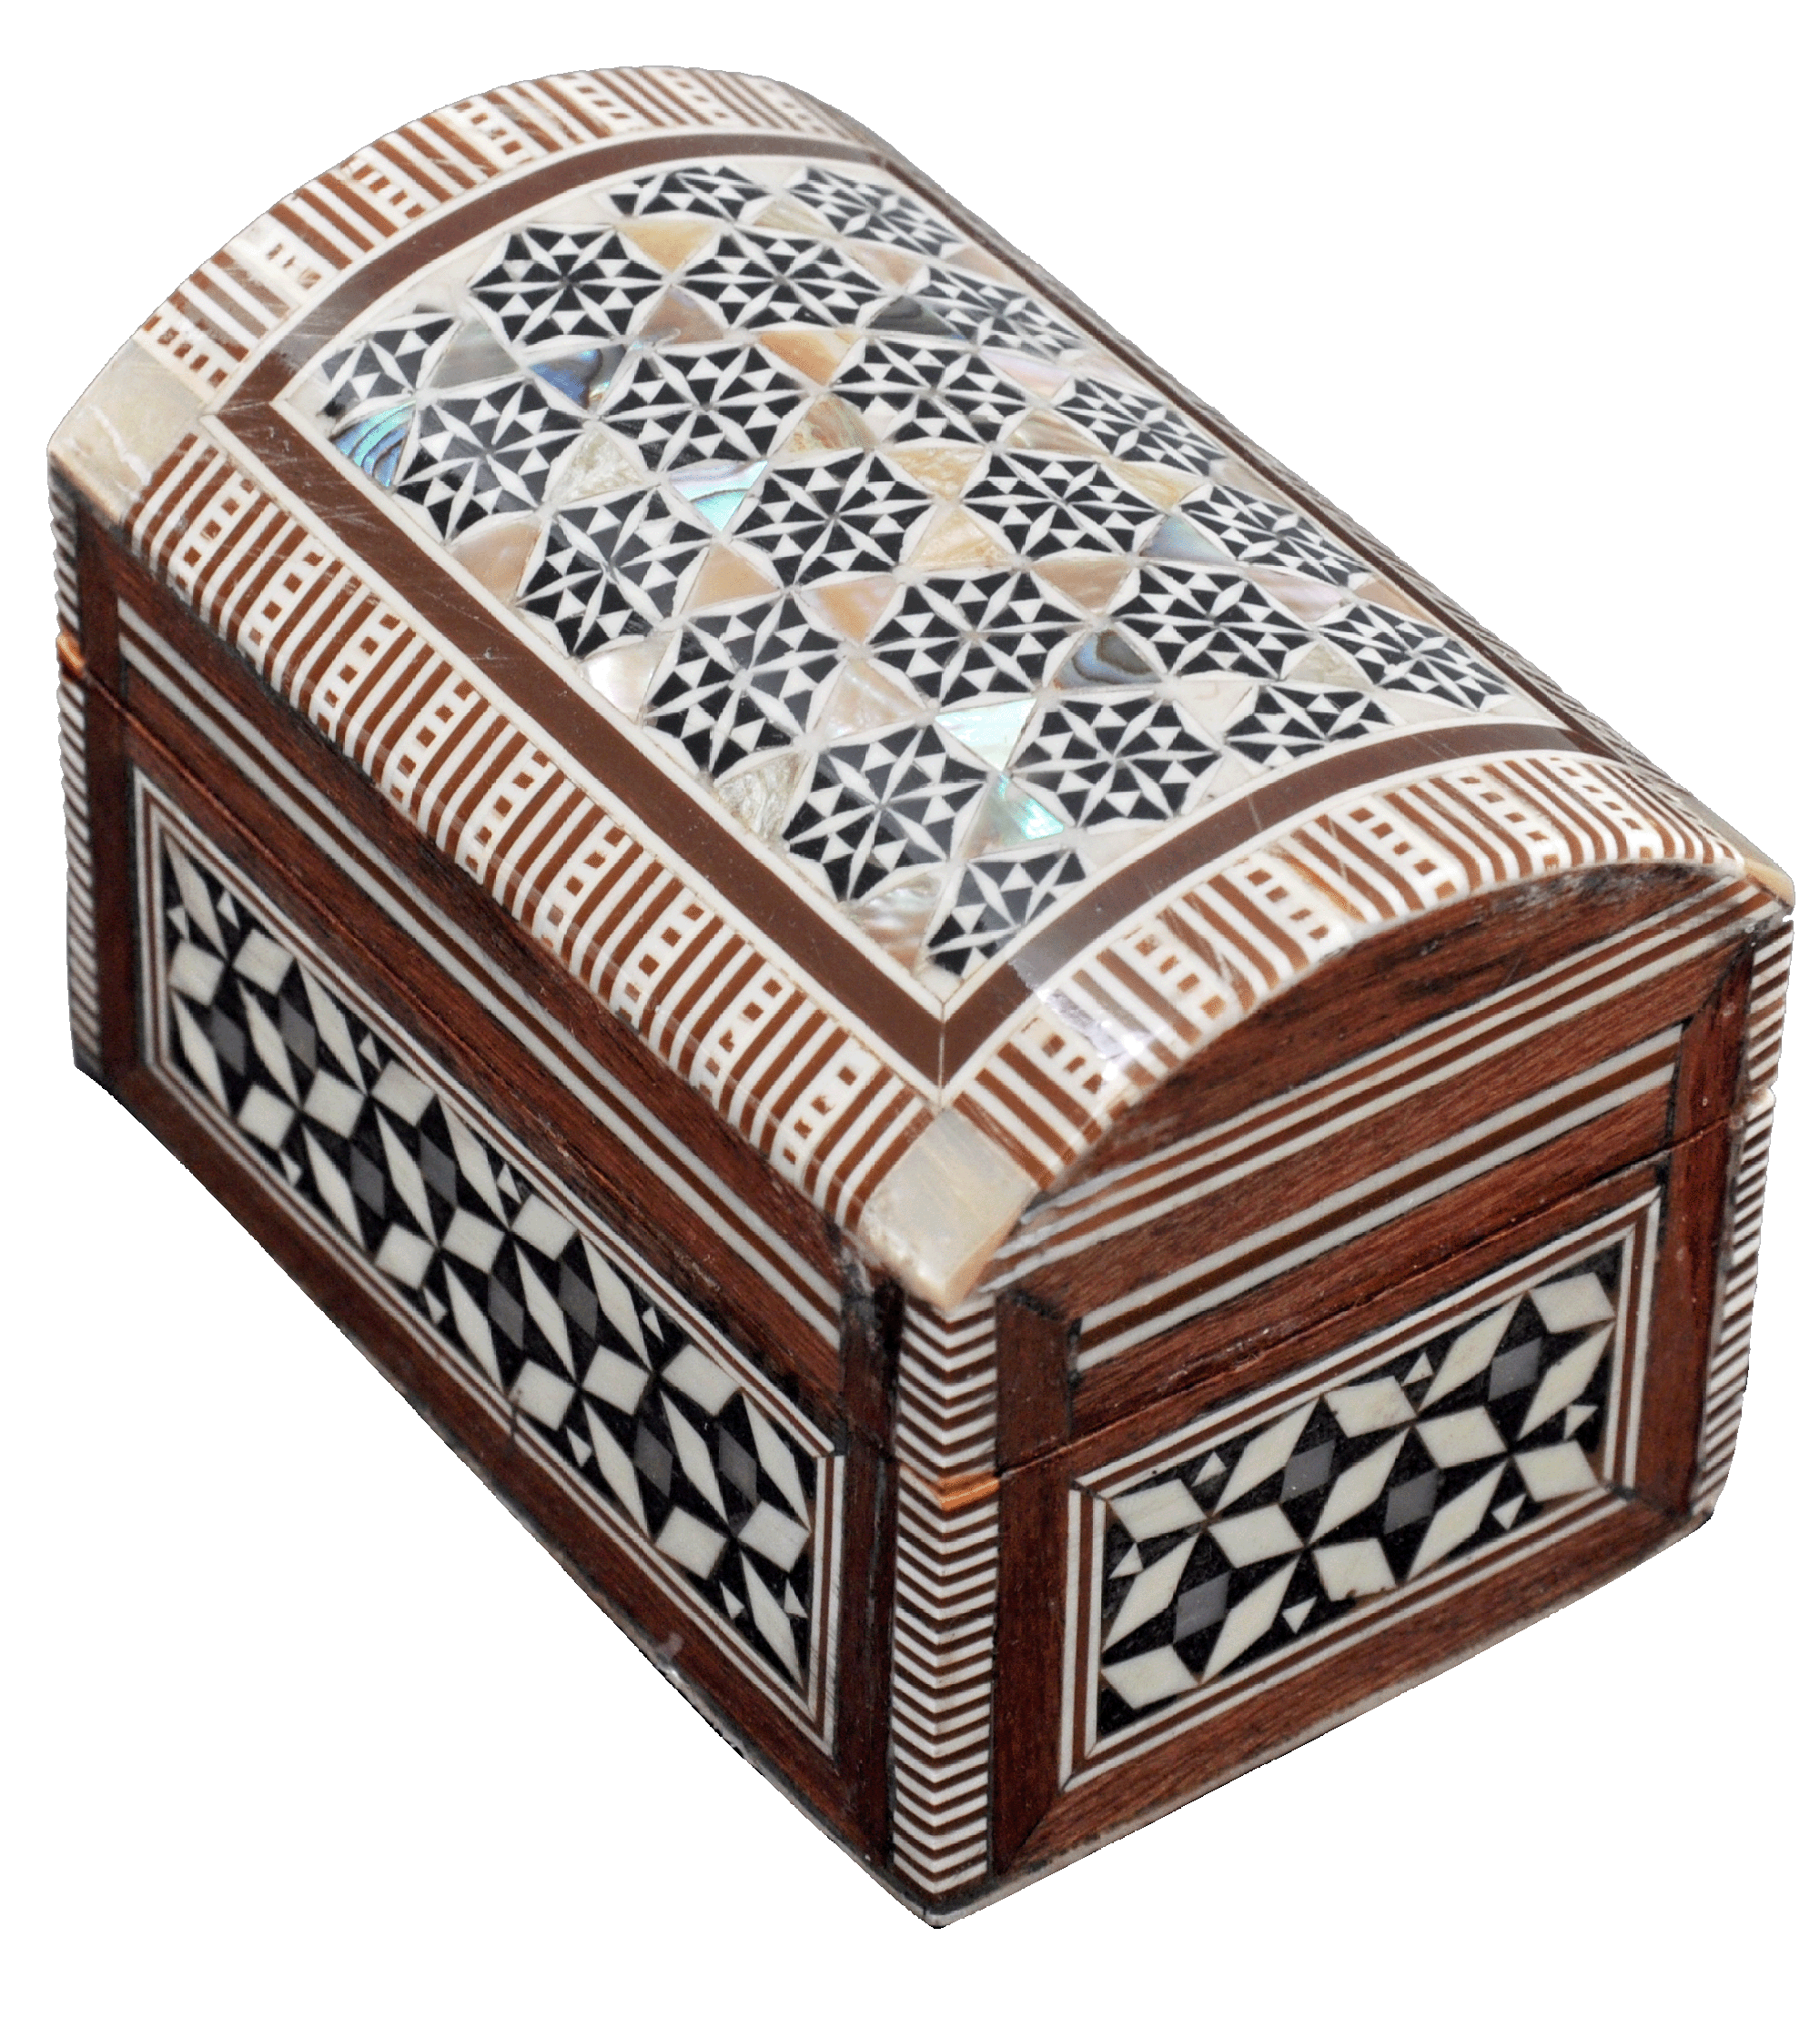 Egyptian Mosaic Jewelry Trinket Box Mother of Pearl BX10